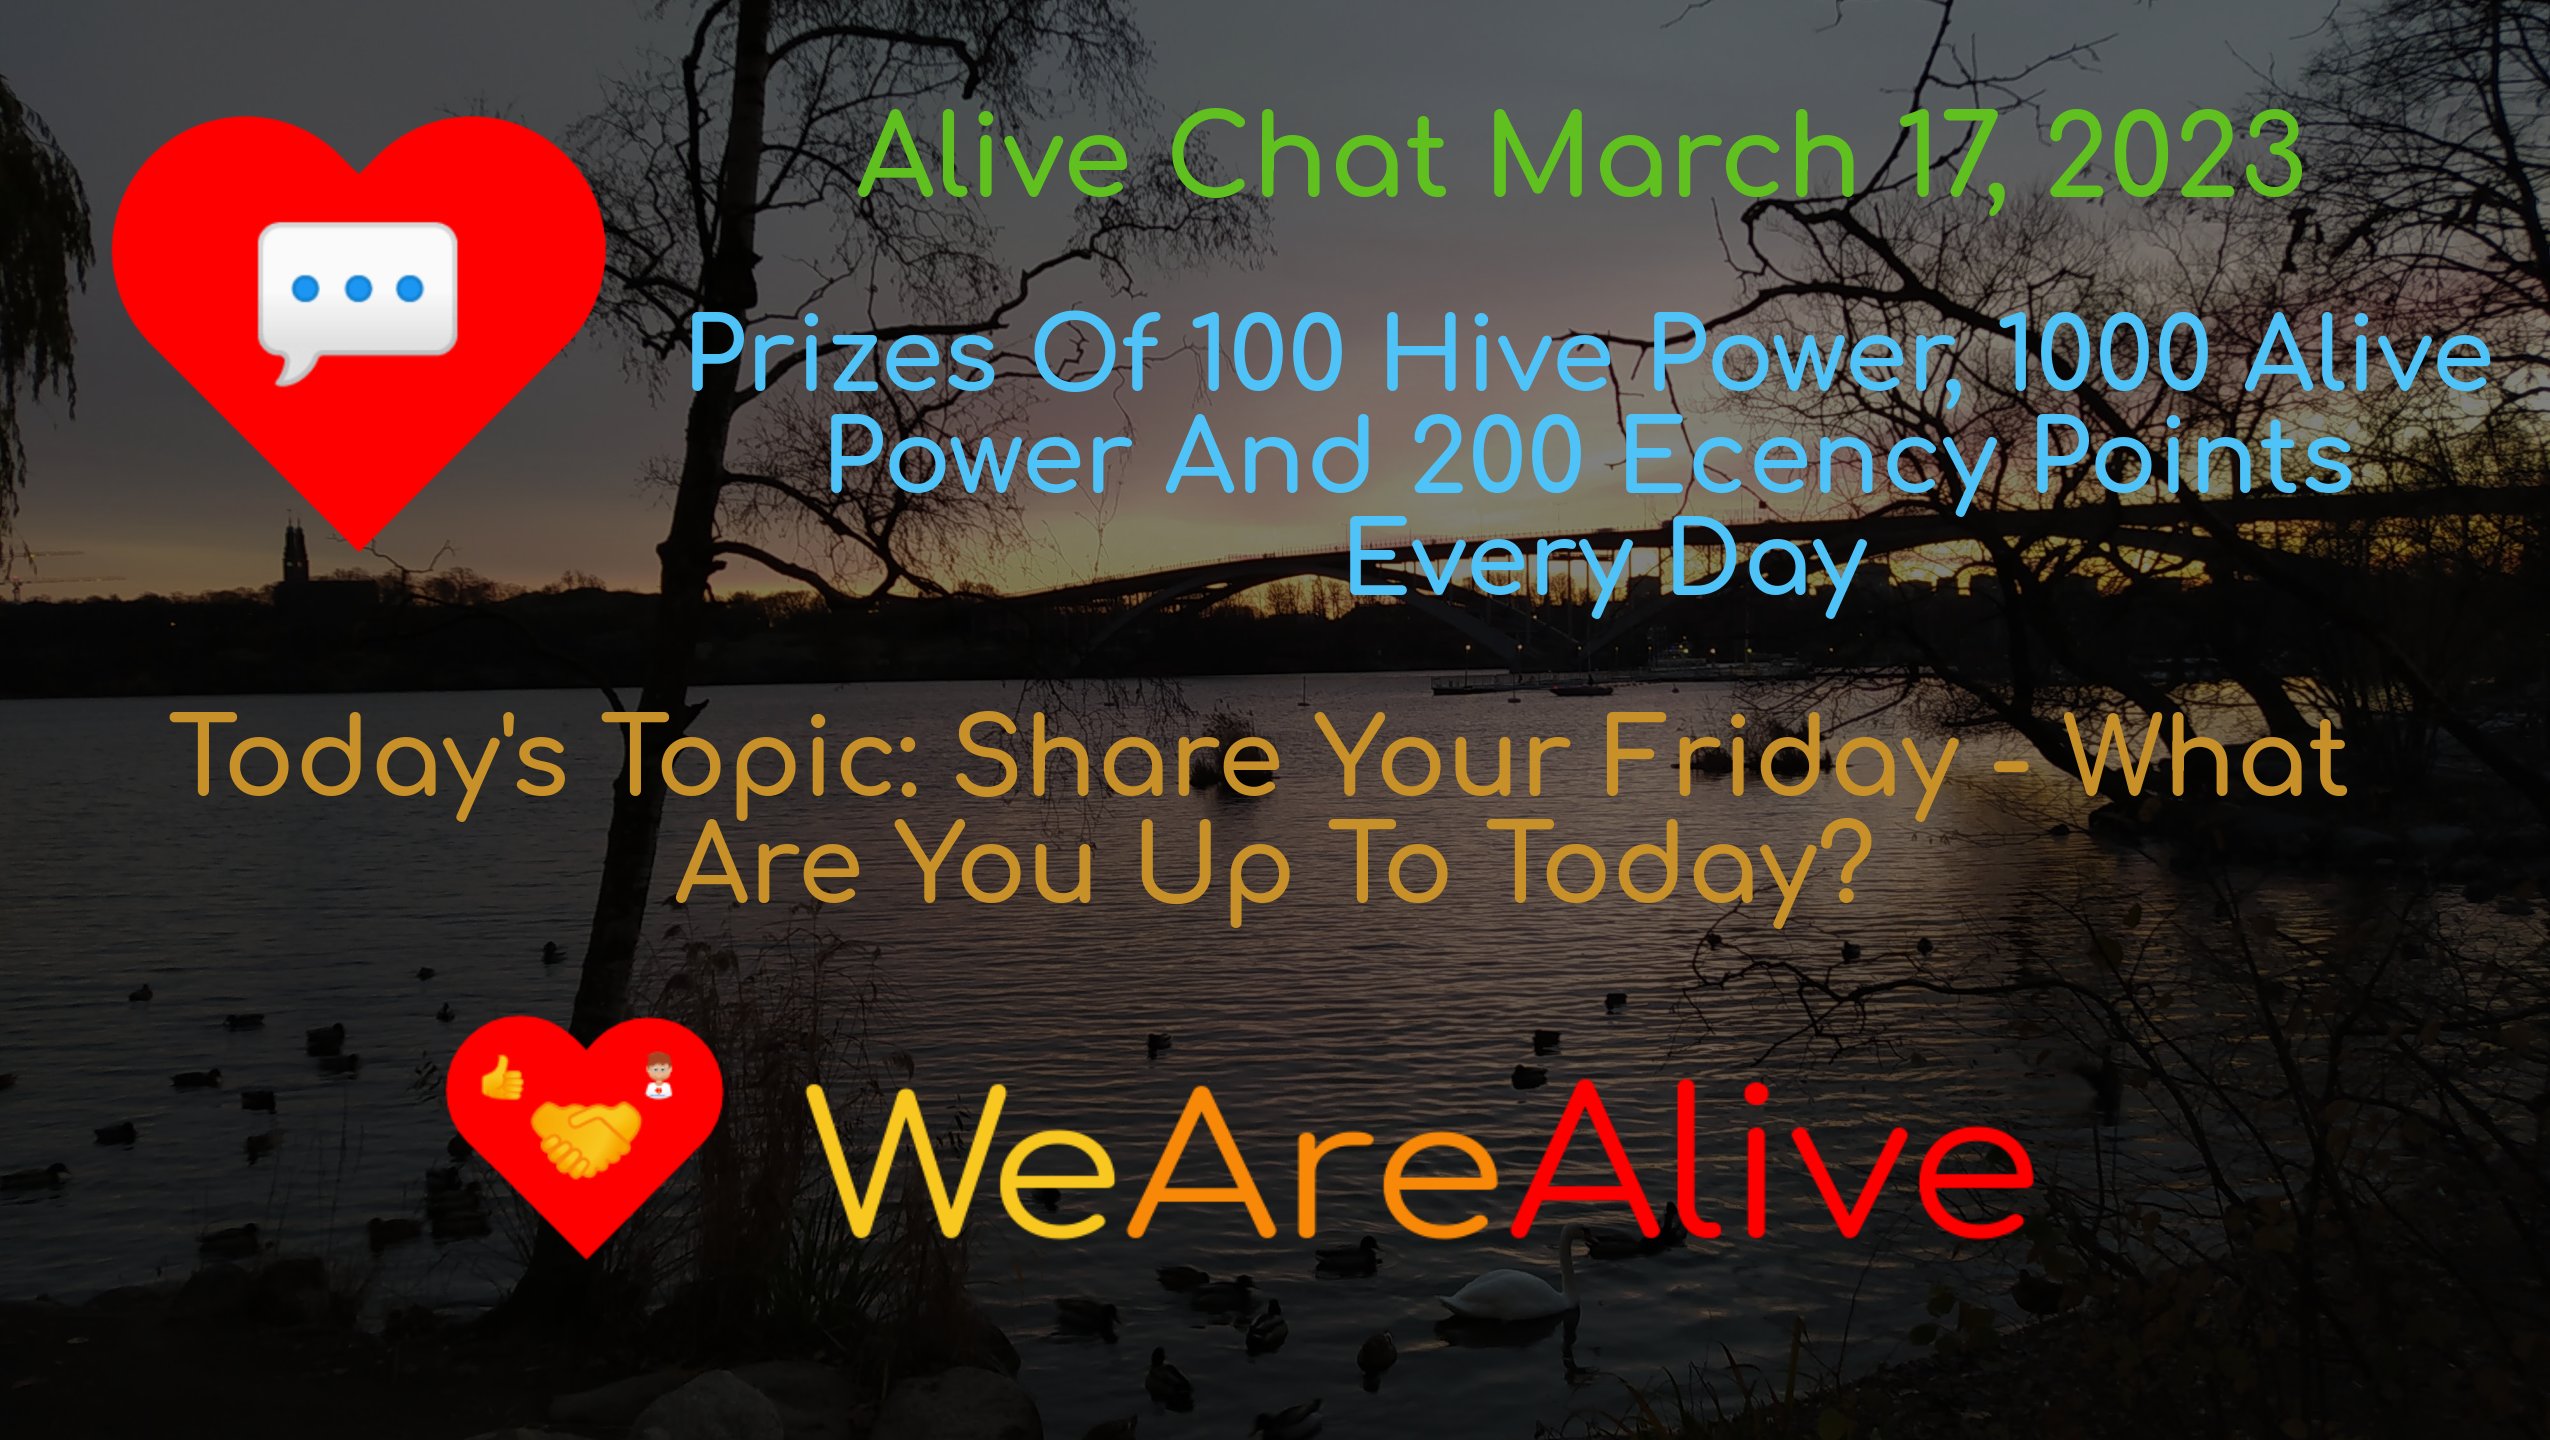 @alive.chat/alive-chat-march-17-2023